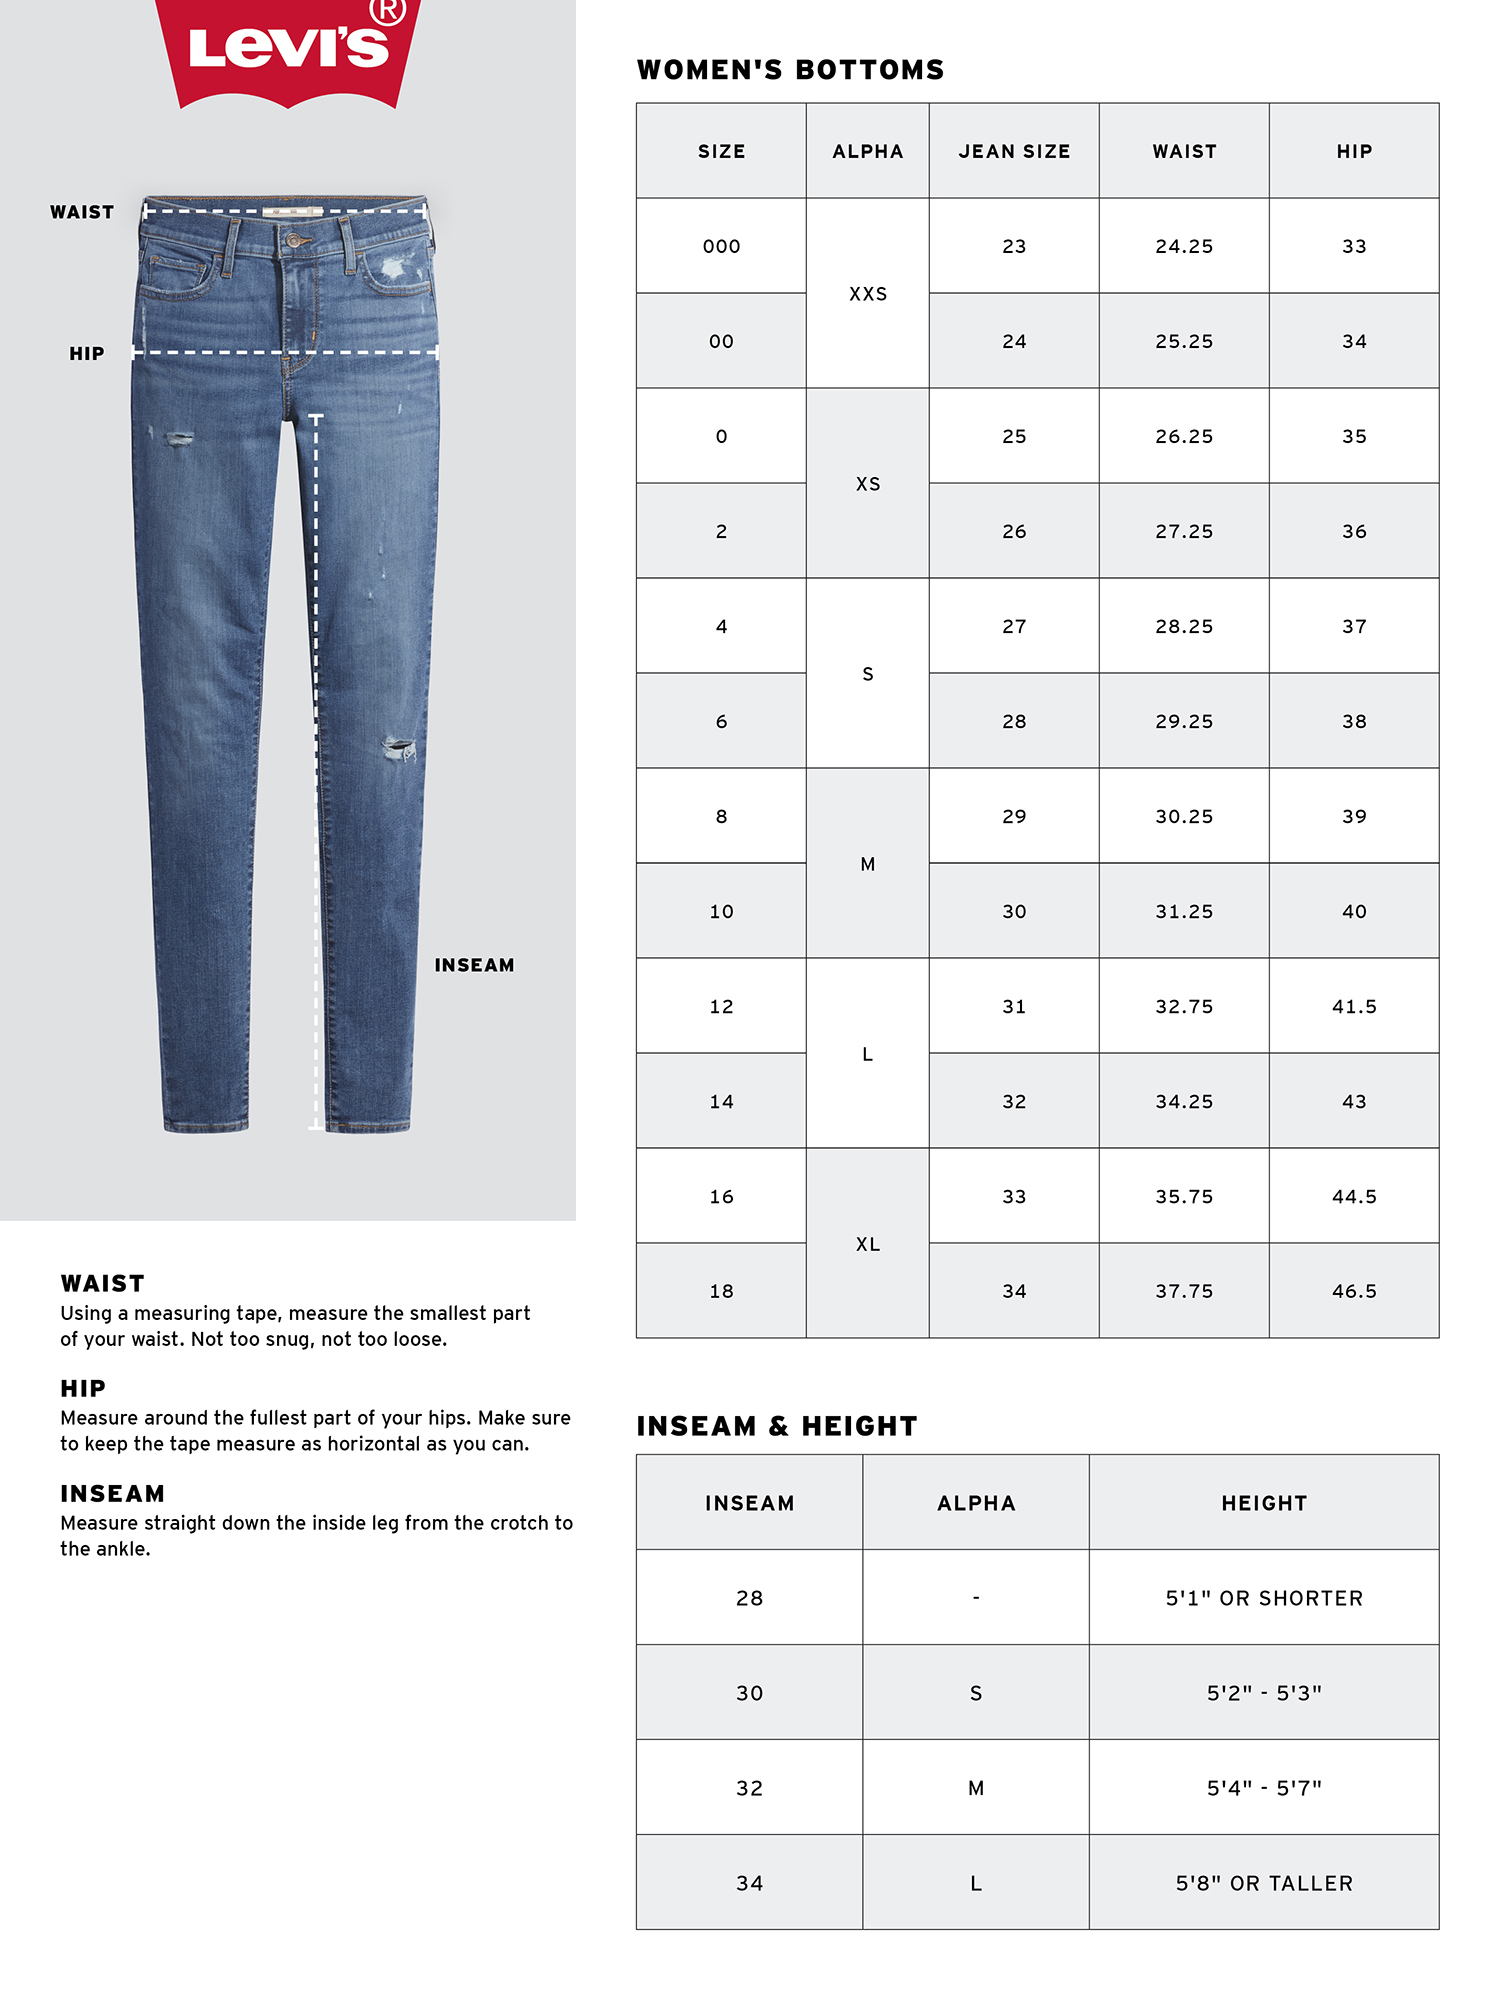 Levi's Original Red Tab 720 High-Rise Super Skinny Jeans - image 5 of 5